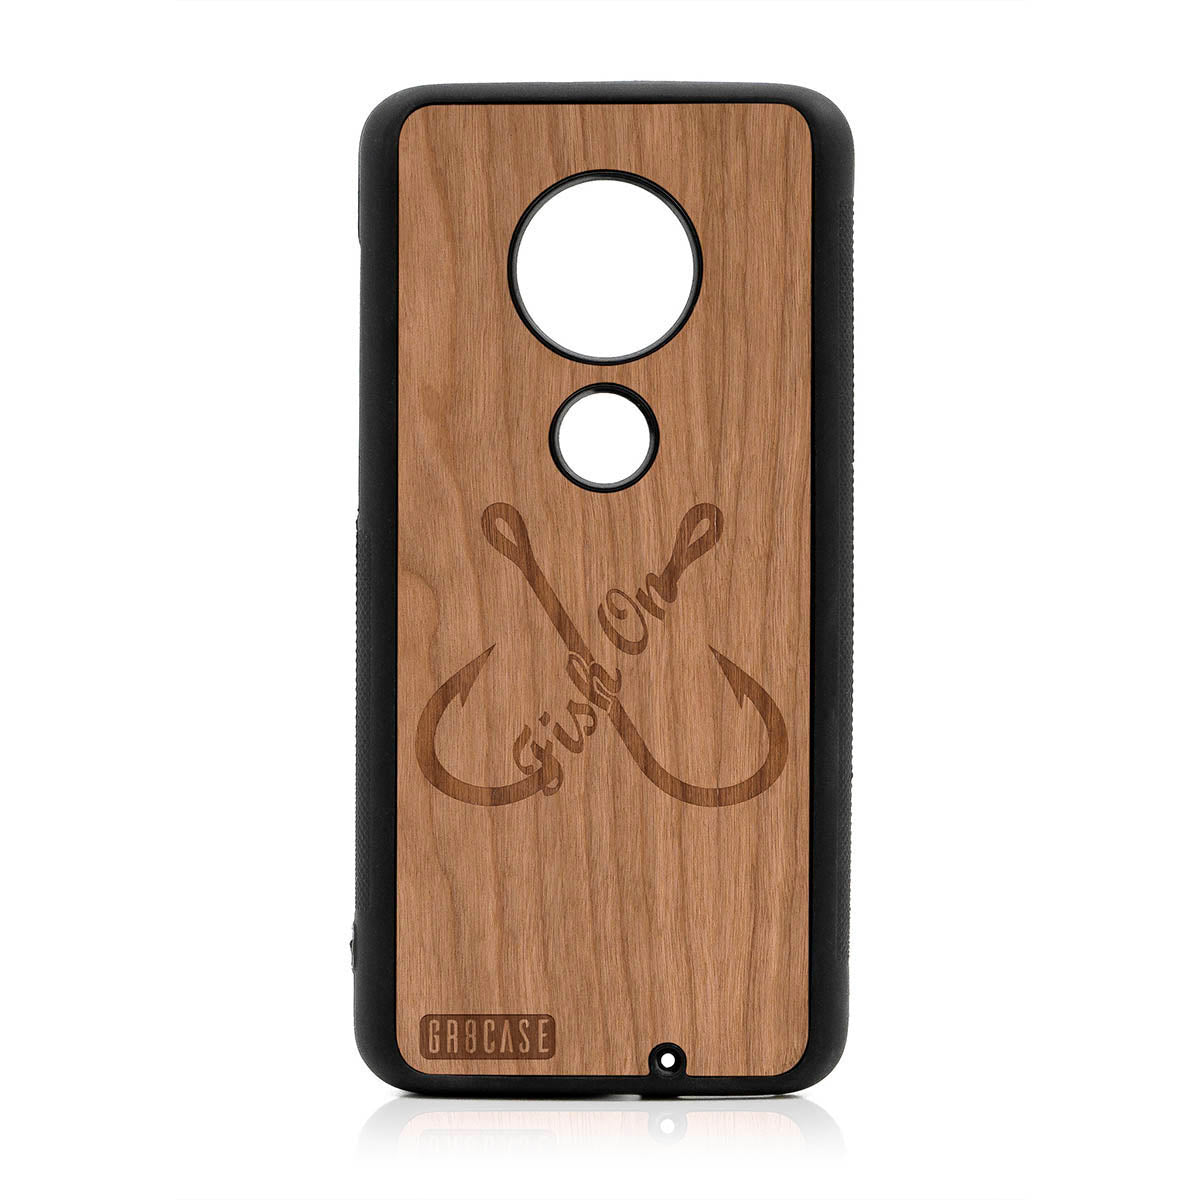 Fish On (Fish Hooks) Design Wood Case For Moto G7 Plus by GR8CASE